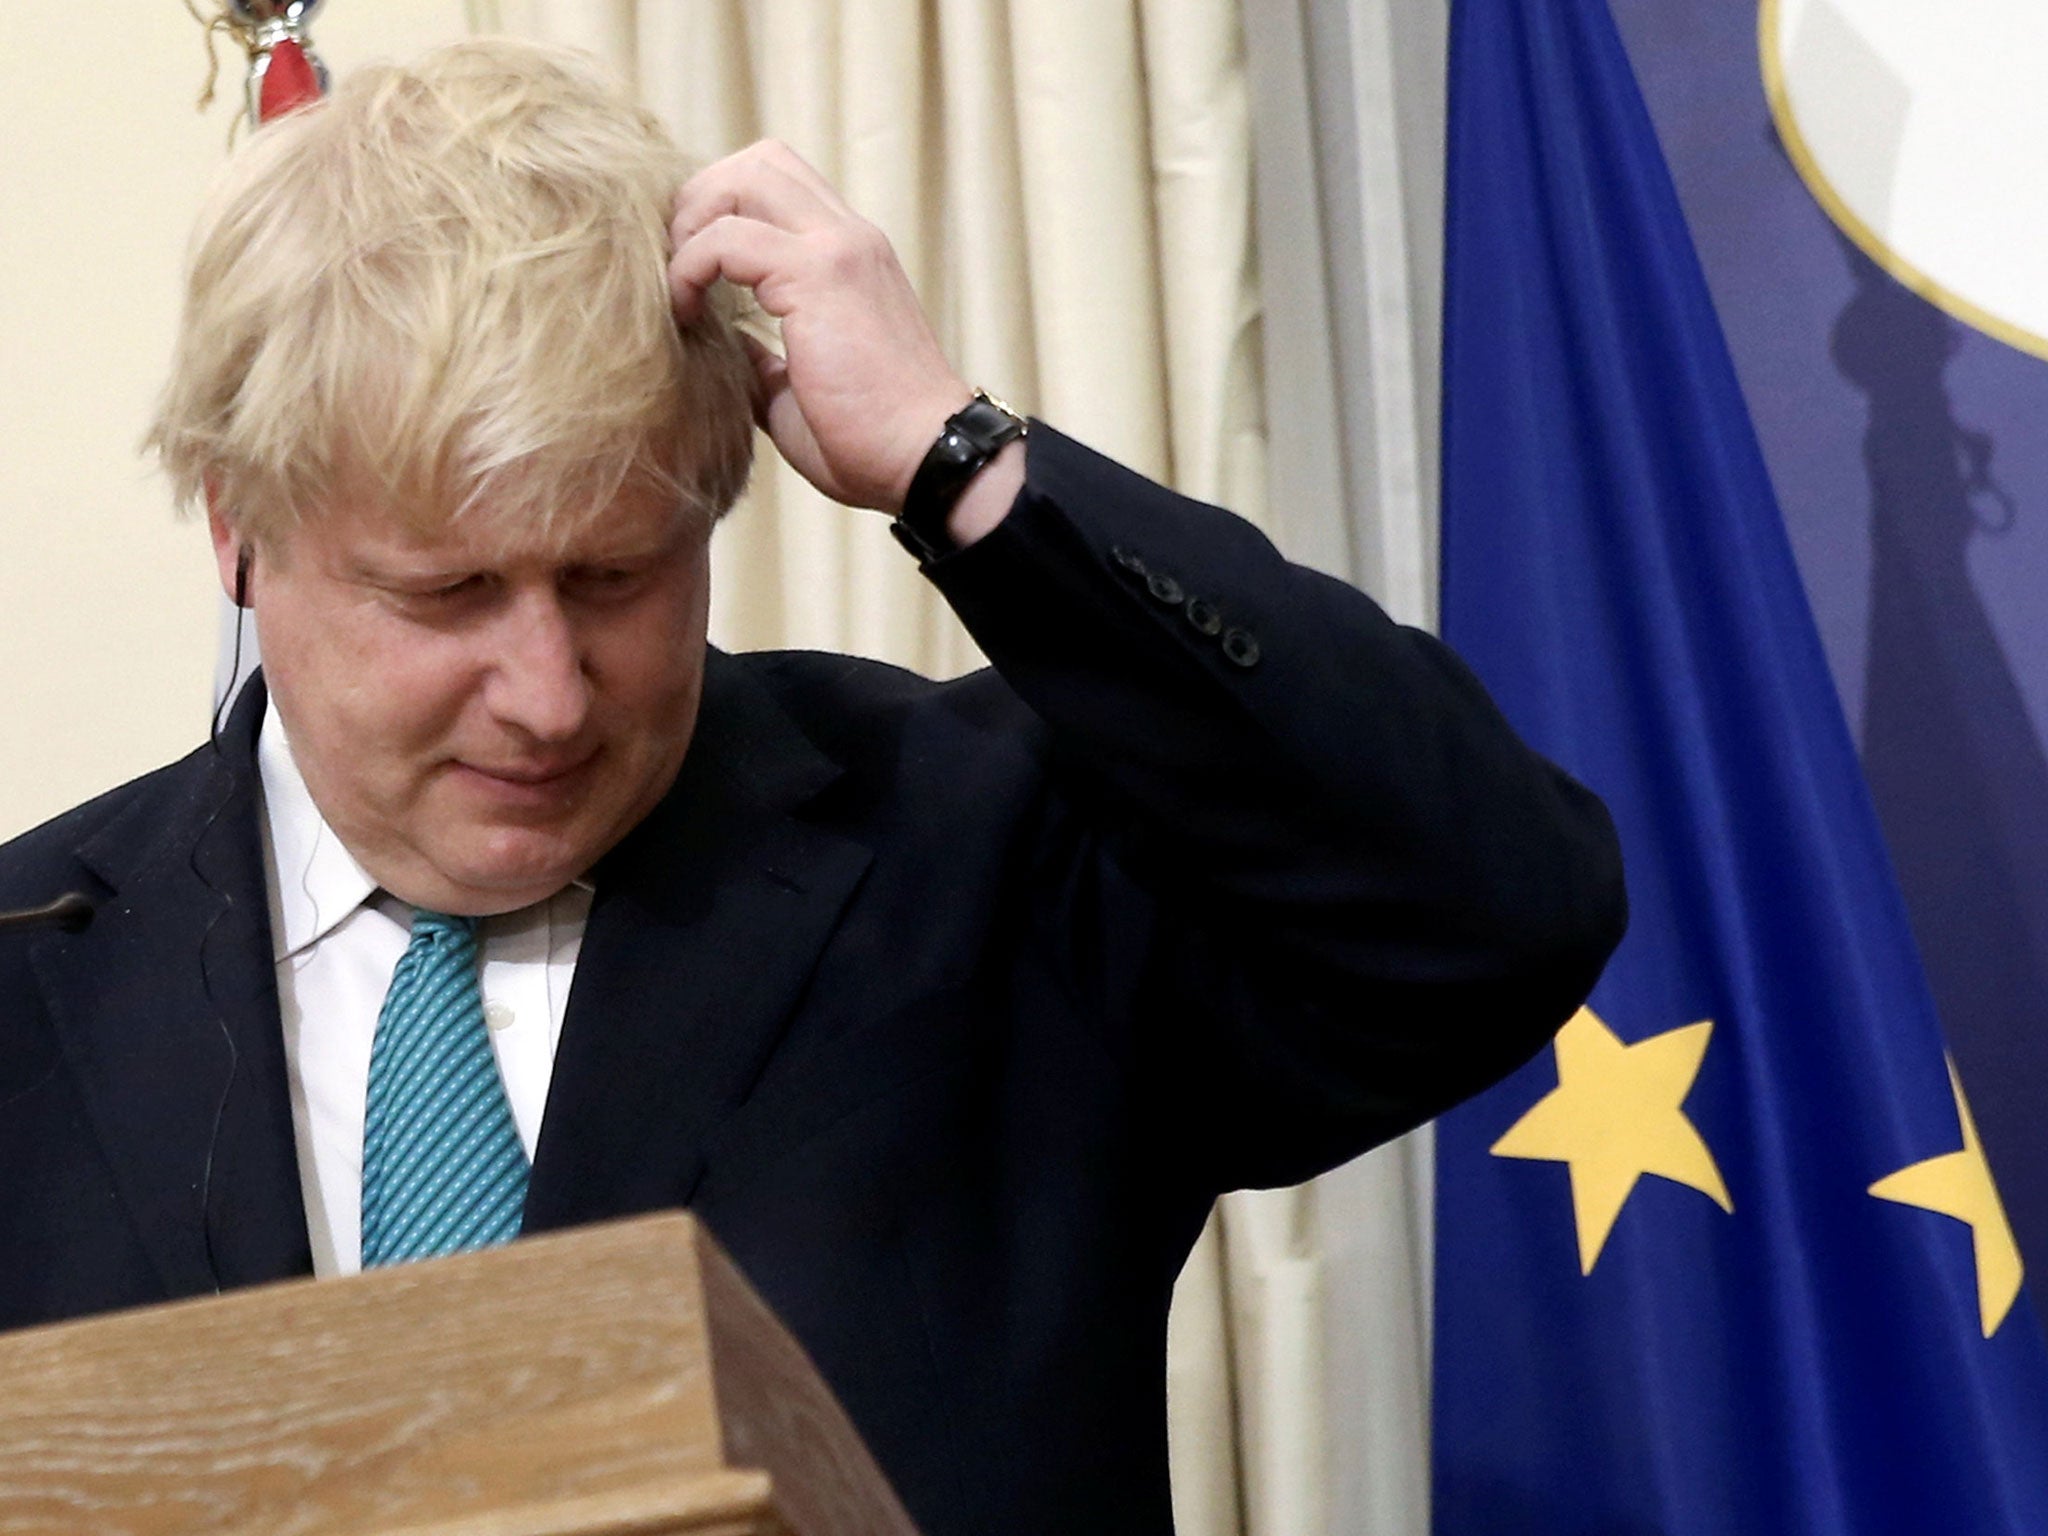 Continuing to allow EU migrants to settle in the UK without restrictions would allow the economy to attract talented people, Boris Johnson said